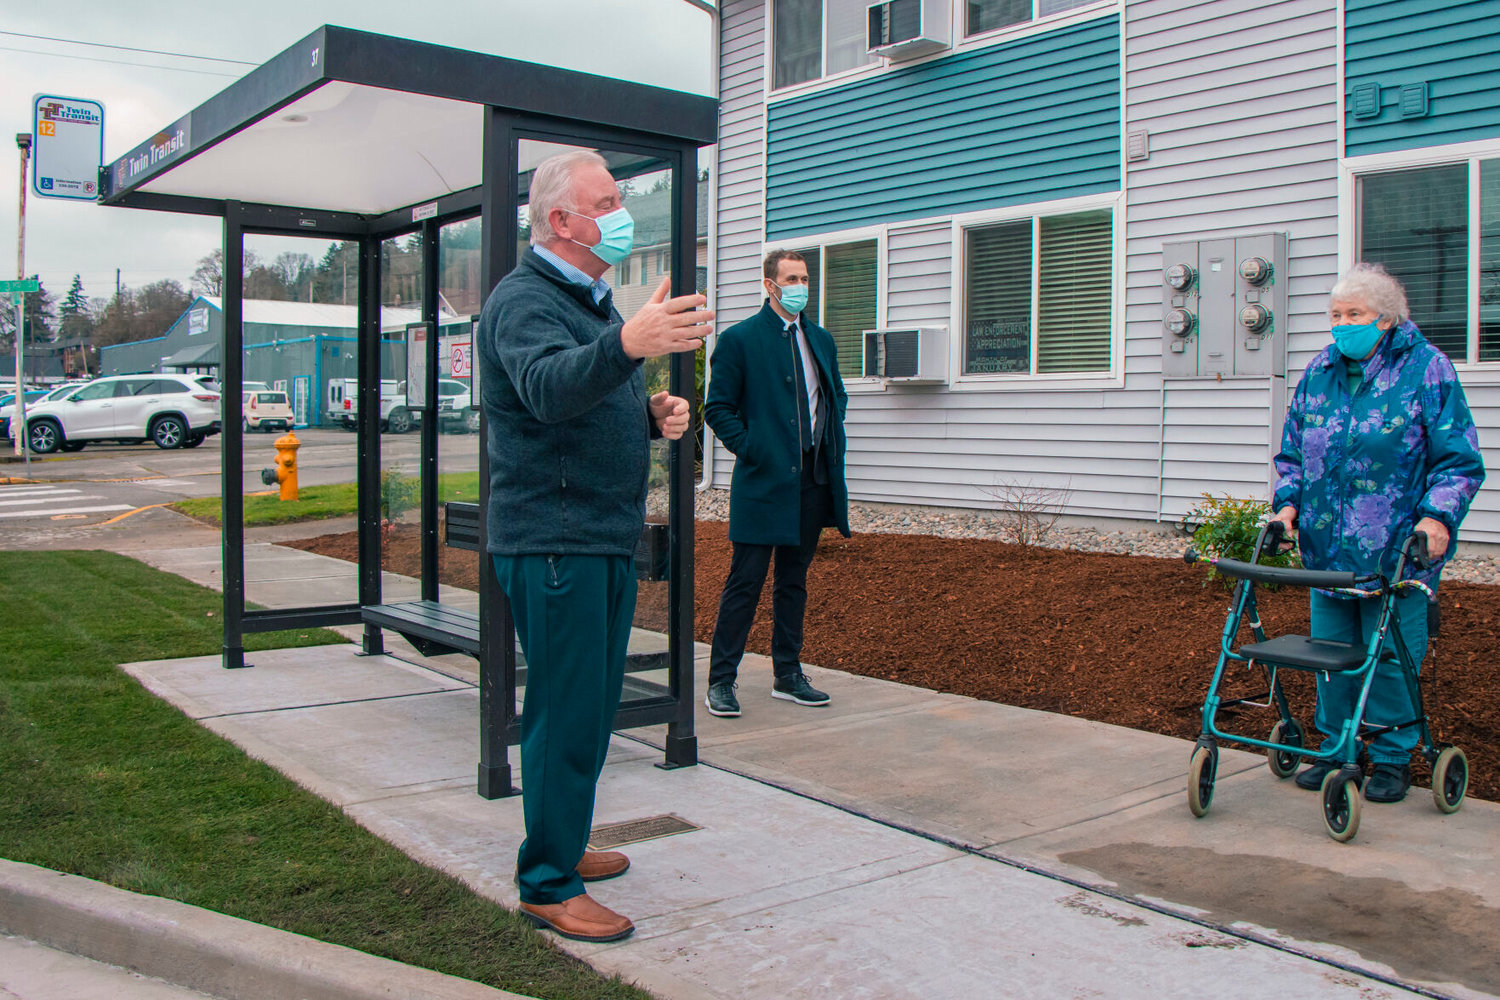 Joe Clark, executive director of Twin Transit, far left, introduces Jean Fairgrieve, far right, to a newly installed bus stop along South Market Blvd. in Chehalis dedicated to her in January.